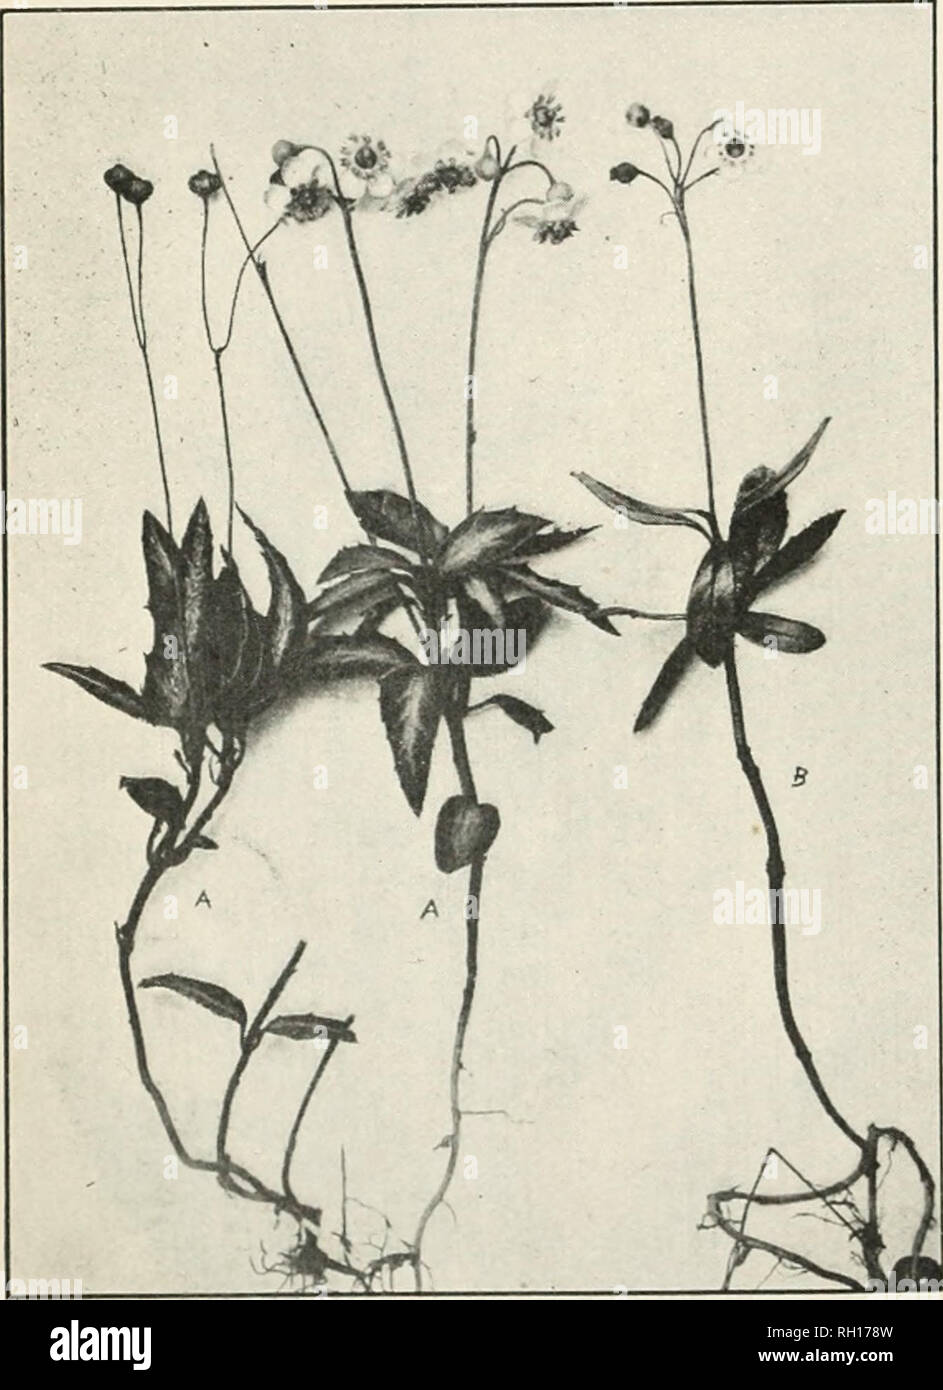 . Bulletin. Agriculture. 16 AMERICAN MEDICINAL LEAVES AND HERBS. PIPSISSEWA. Chimnphila umbellata (L.) Niitt. Pharmacopoeial name.—Chimaphila. Synonyms.—PyroJa umbellata L.; Chimaphila corymbosa Pursh. ()th&lt;'r common nanies.—Prince's pine, pyrola, rheumatism weed, hitler wiutergreen, groiind holly, king's cure, love-in-winter, noble pine, pine tulip. Habitat and range.—Pipsissewa is a native of this country, growing in dry, shady woods, especially in pine forests, and its range ex- tends from Nova Scotia to British Columbia, south to Georgia, Mexico, and Cali- fornia. It also occurs in Euro Stock Photo